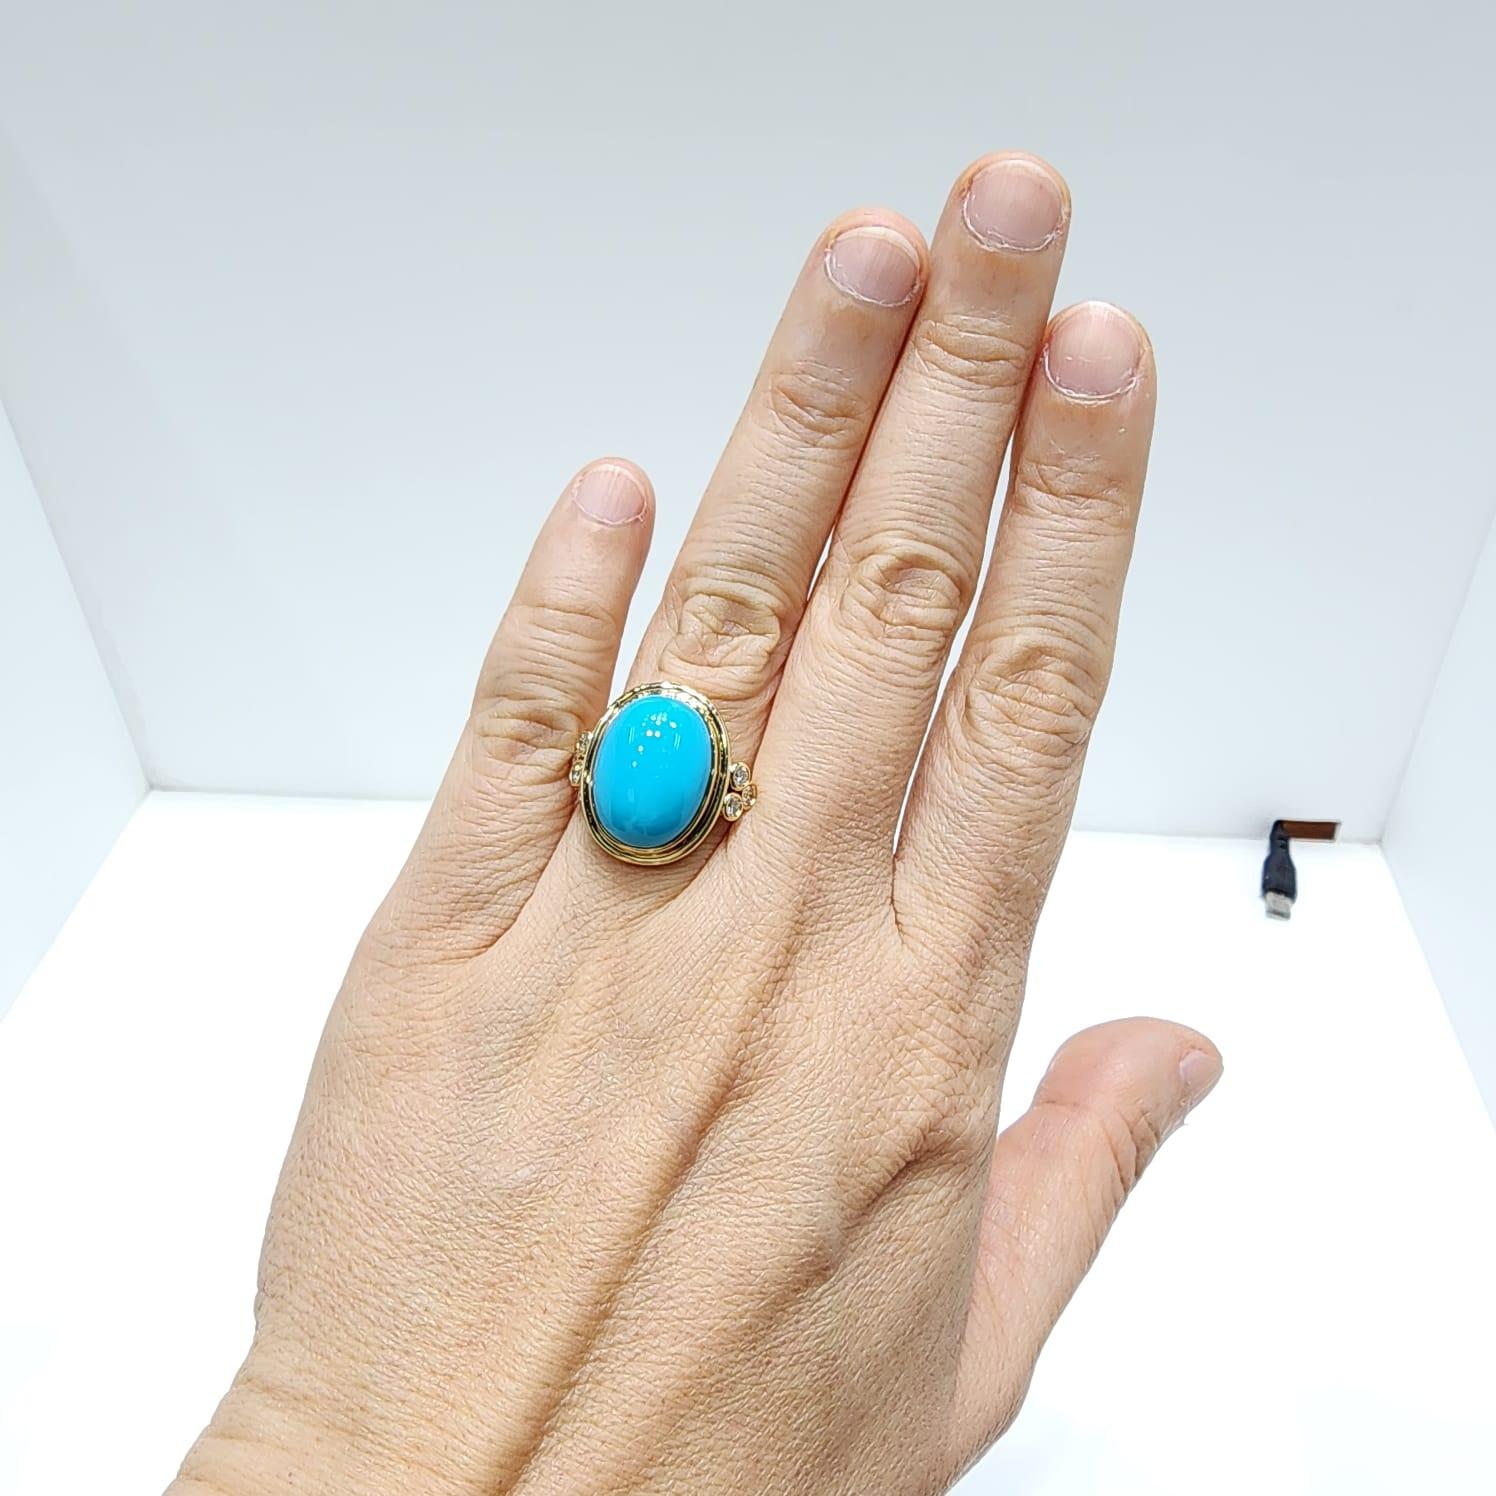 This ring features a 7.90 carat sleeping beauty turquoise. All turquoise use in production are from the prominent Sleeping Beauty Mine. Famous for it solid, light blue color with no matrix. Assented with 0.24 carat of white round diamonds. Ring is